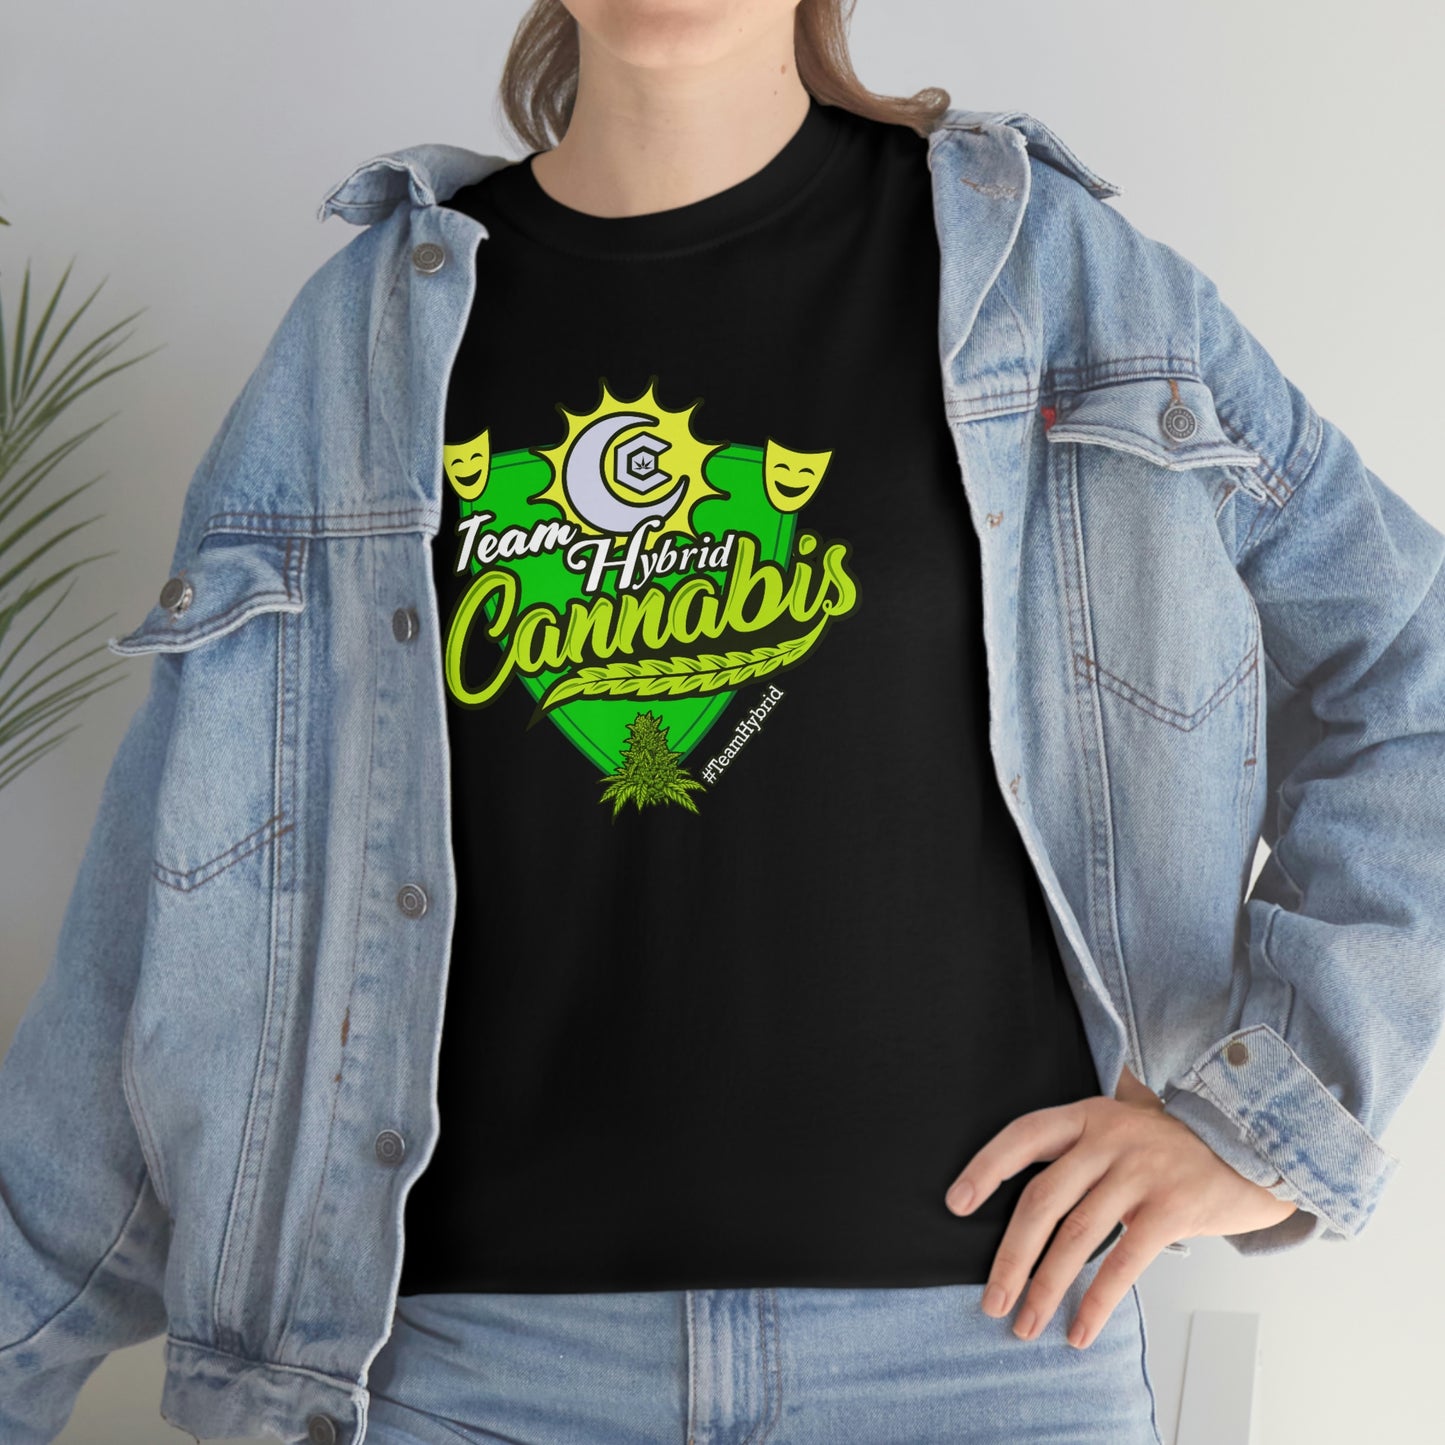 a woman wearing a Team Hybrid Cannabis T-shirt and jeans.